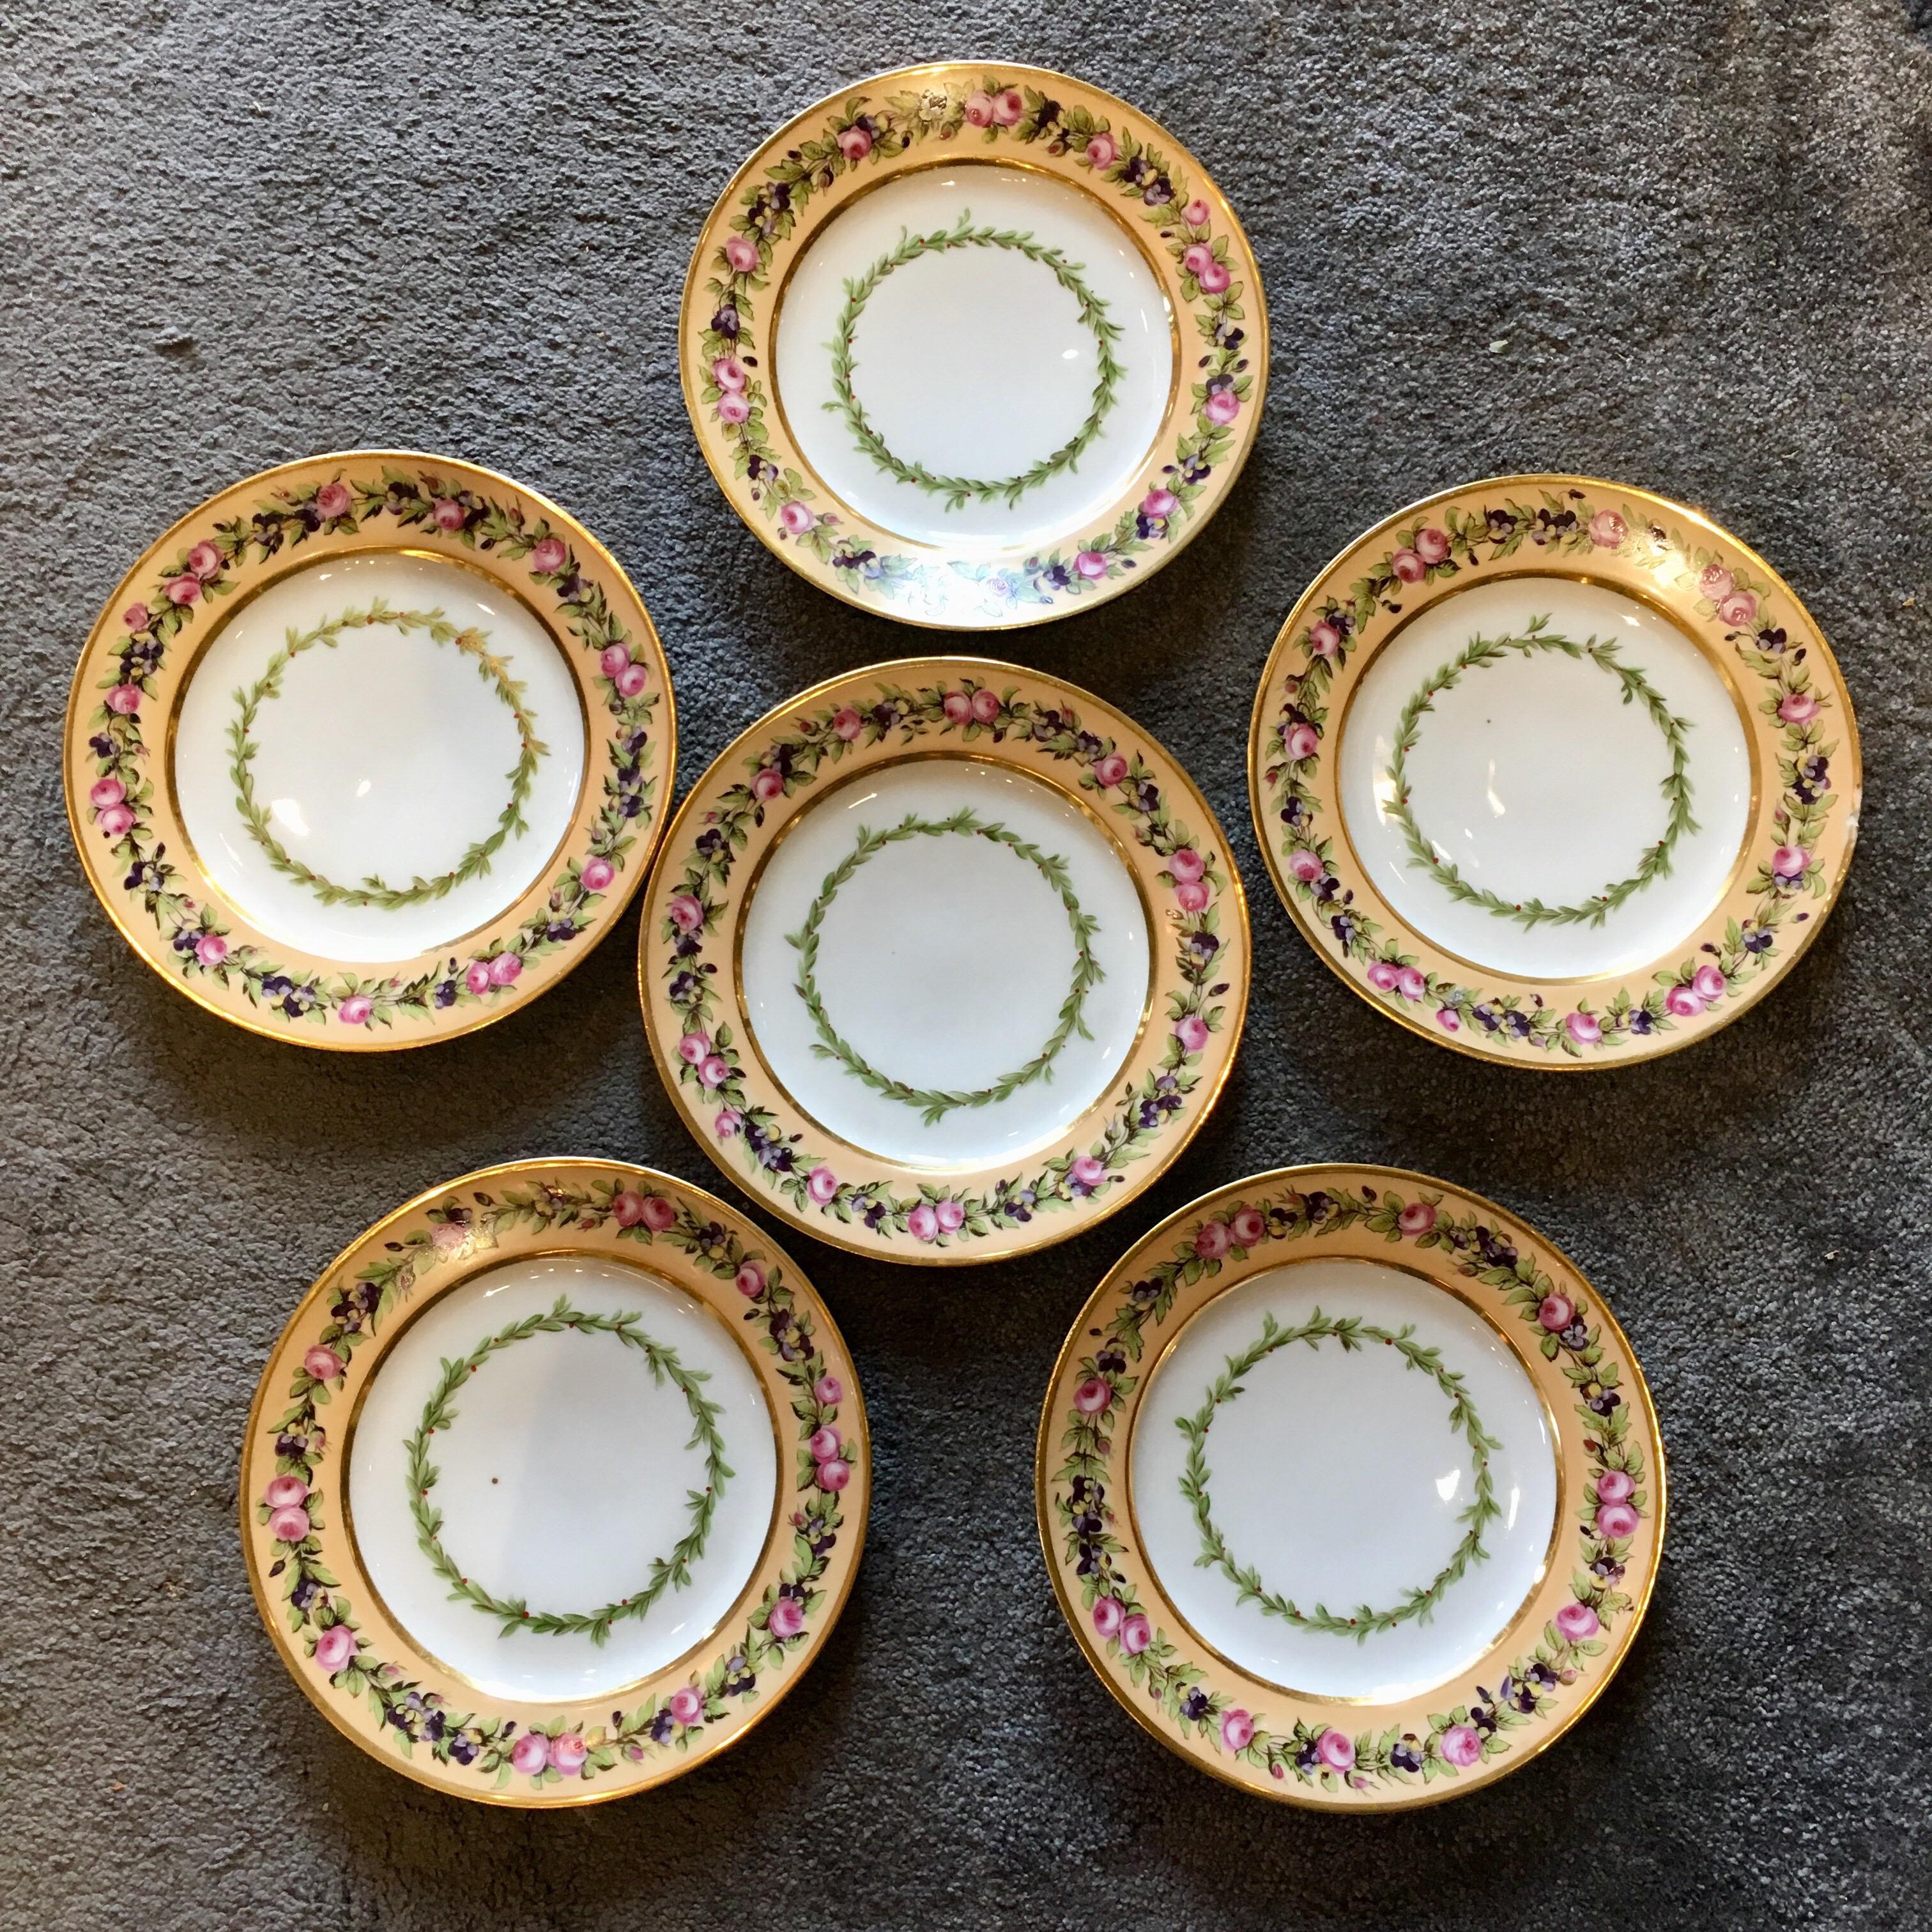 Porcelaine de Paris, circa 1850.
Very beautiful and elegant set of 12 plates to the model.
A superb pattern of roses, pansies and foliage. Circled with a gold border.

Measures: Diameter 23.5cm, Height 3.5cm.